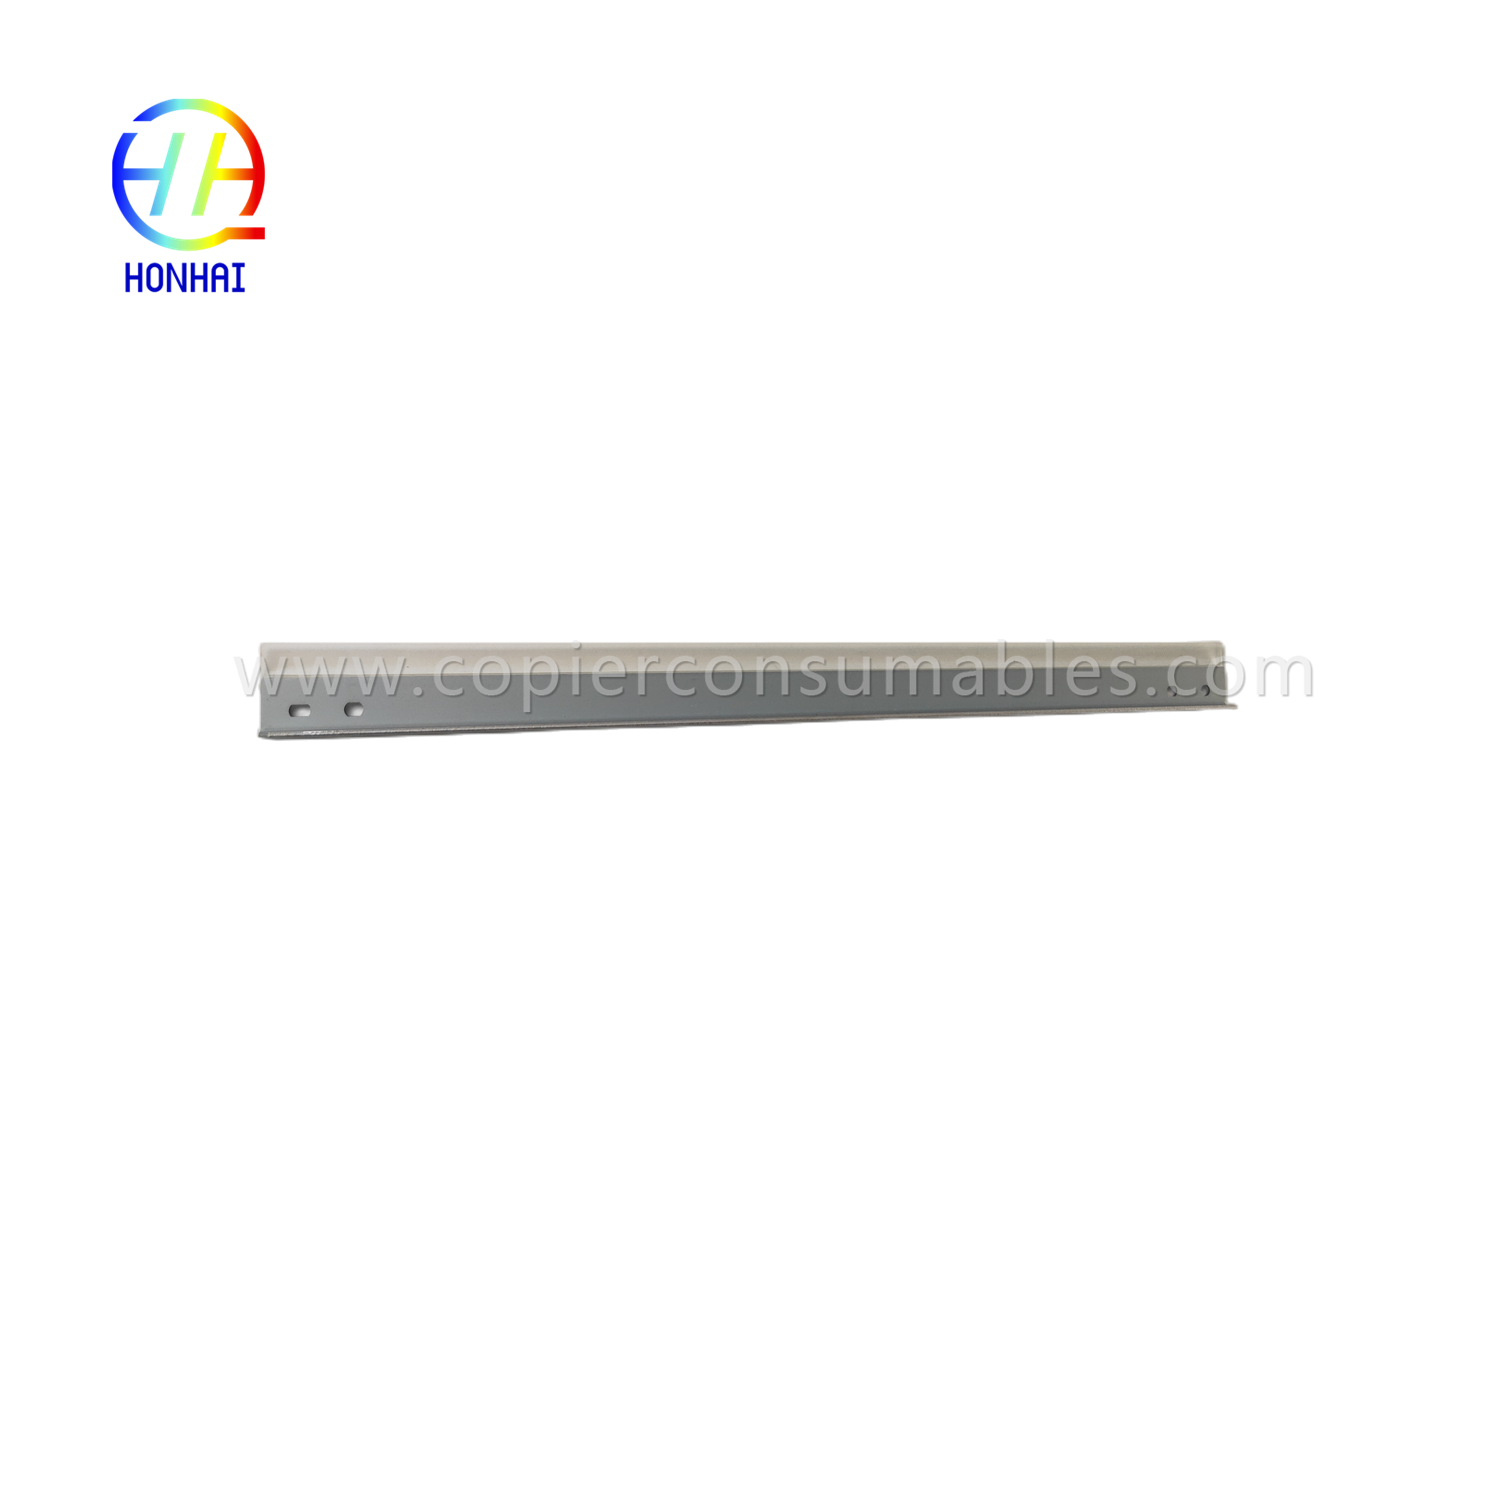 https://c585.goodo.net/drum-cleaning-blade-for-ricoh-mp2501-2015-2001-2001l-2501l-ad04-2083-ad042083-ምርት/